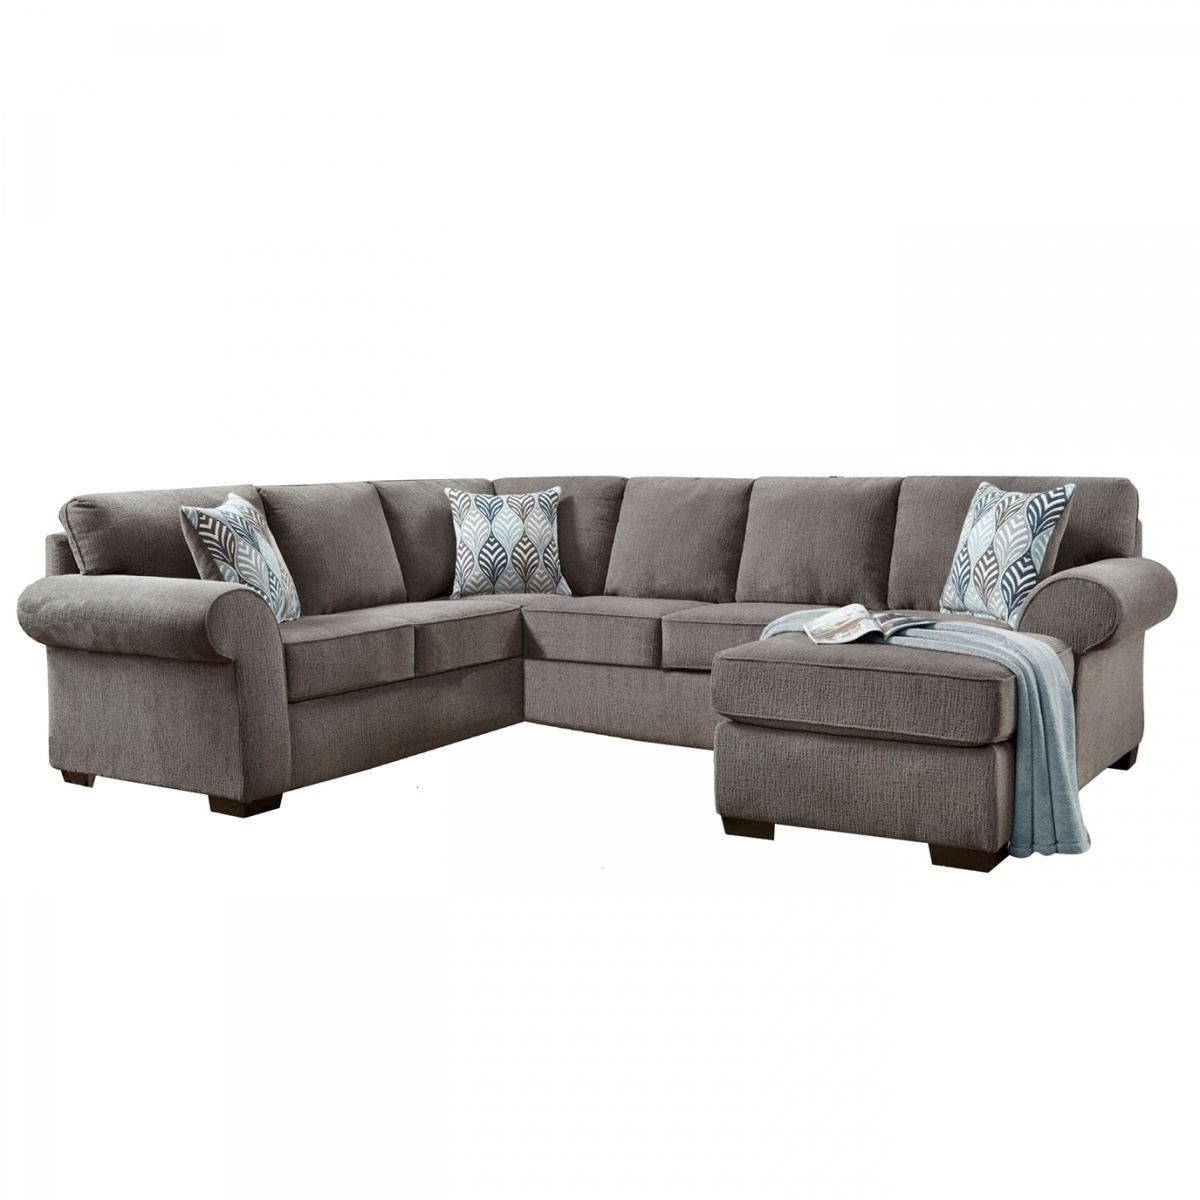 Grey Sectional Mcdade Graphite 2 Piece W Raf Chaise Living Spaces Intended For Mcdade Graphite 2 Piece Sectionals With Raf Chaise (View 3 of 30)